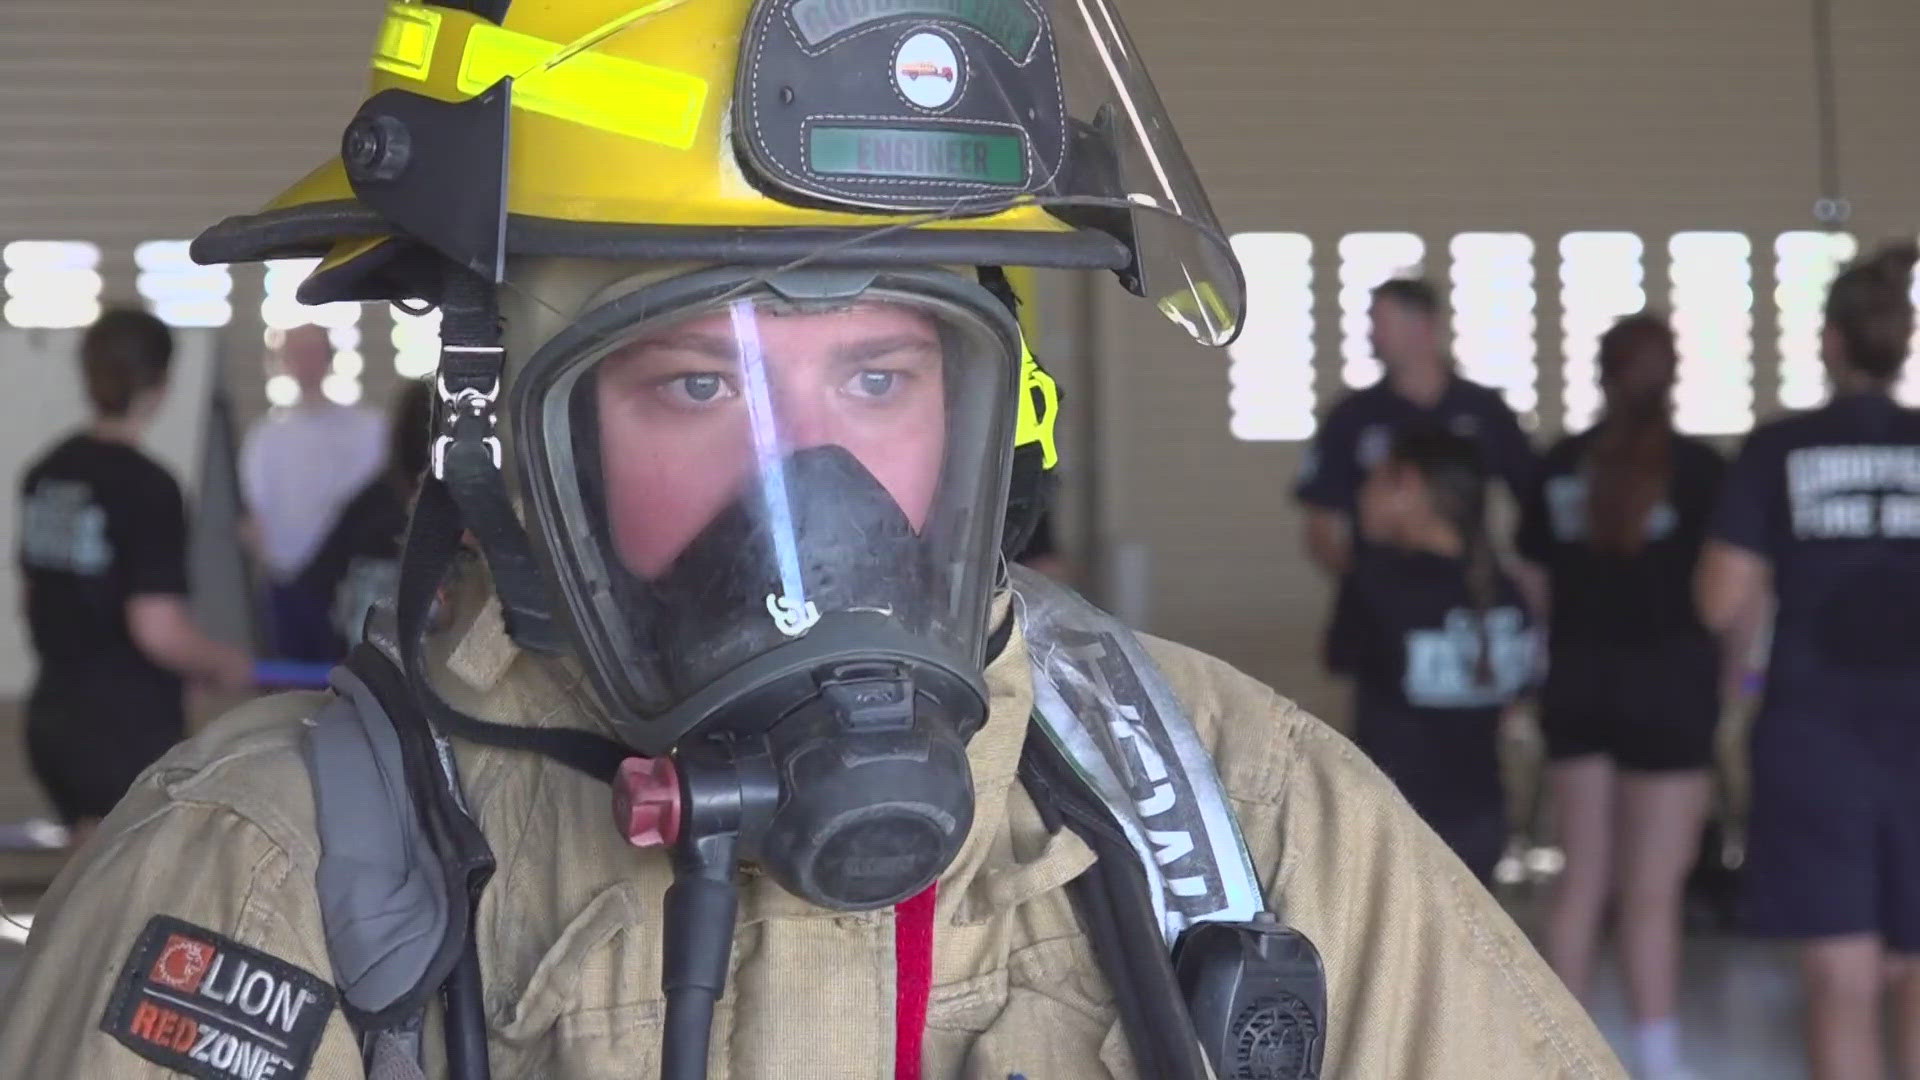 The Goodyear Fire Department is working to introduced young women to fire service.